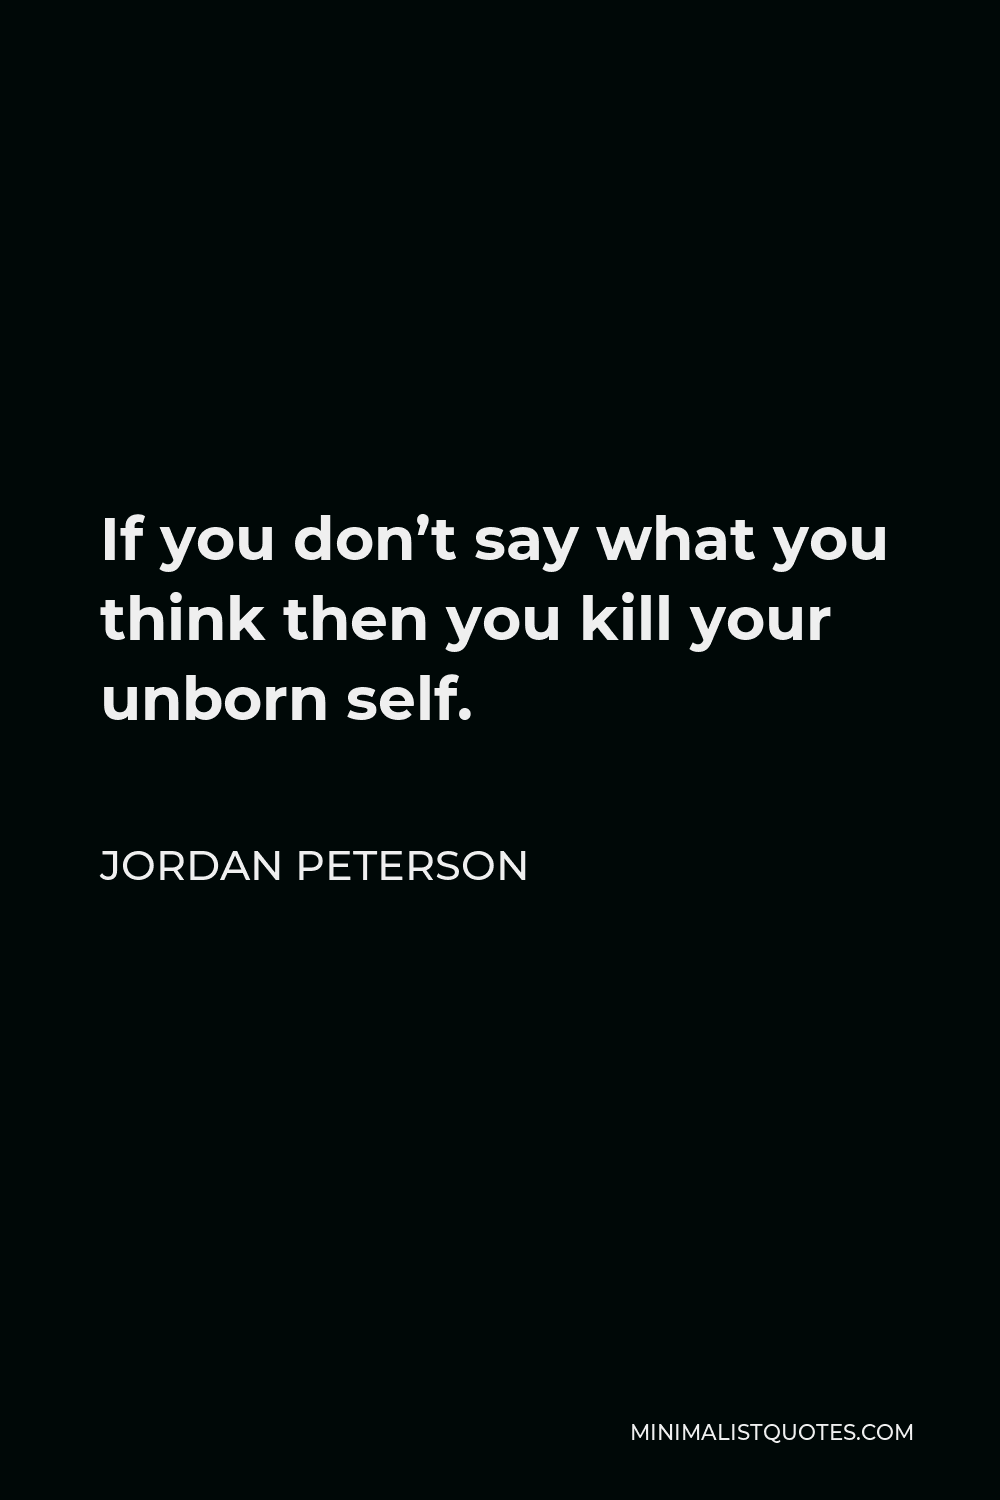 Jordan Peterson Quote - If you don’t say what you think then you kill your unborn self.